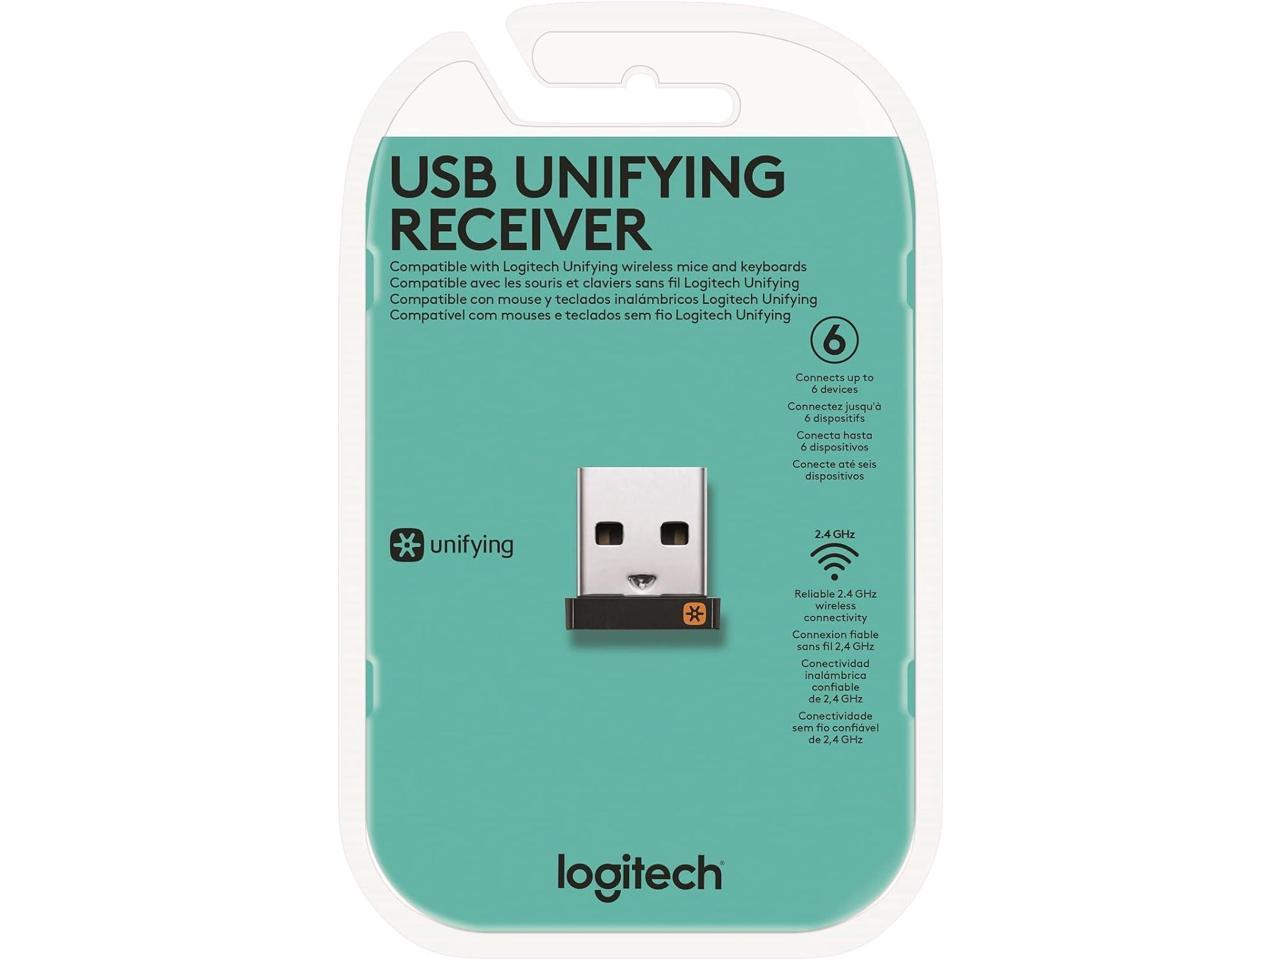 radikal Derved mastermind Logitech USB Unifying Receiver, 2.4 GHz Wireless Technology, USB Plug  Compatible with all Logitech Unifying Devices like Wireless Mouse and  Keyboard, PC / Mac / Laptop - Black - Newegg.com